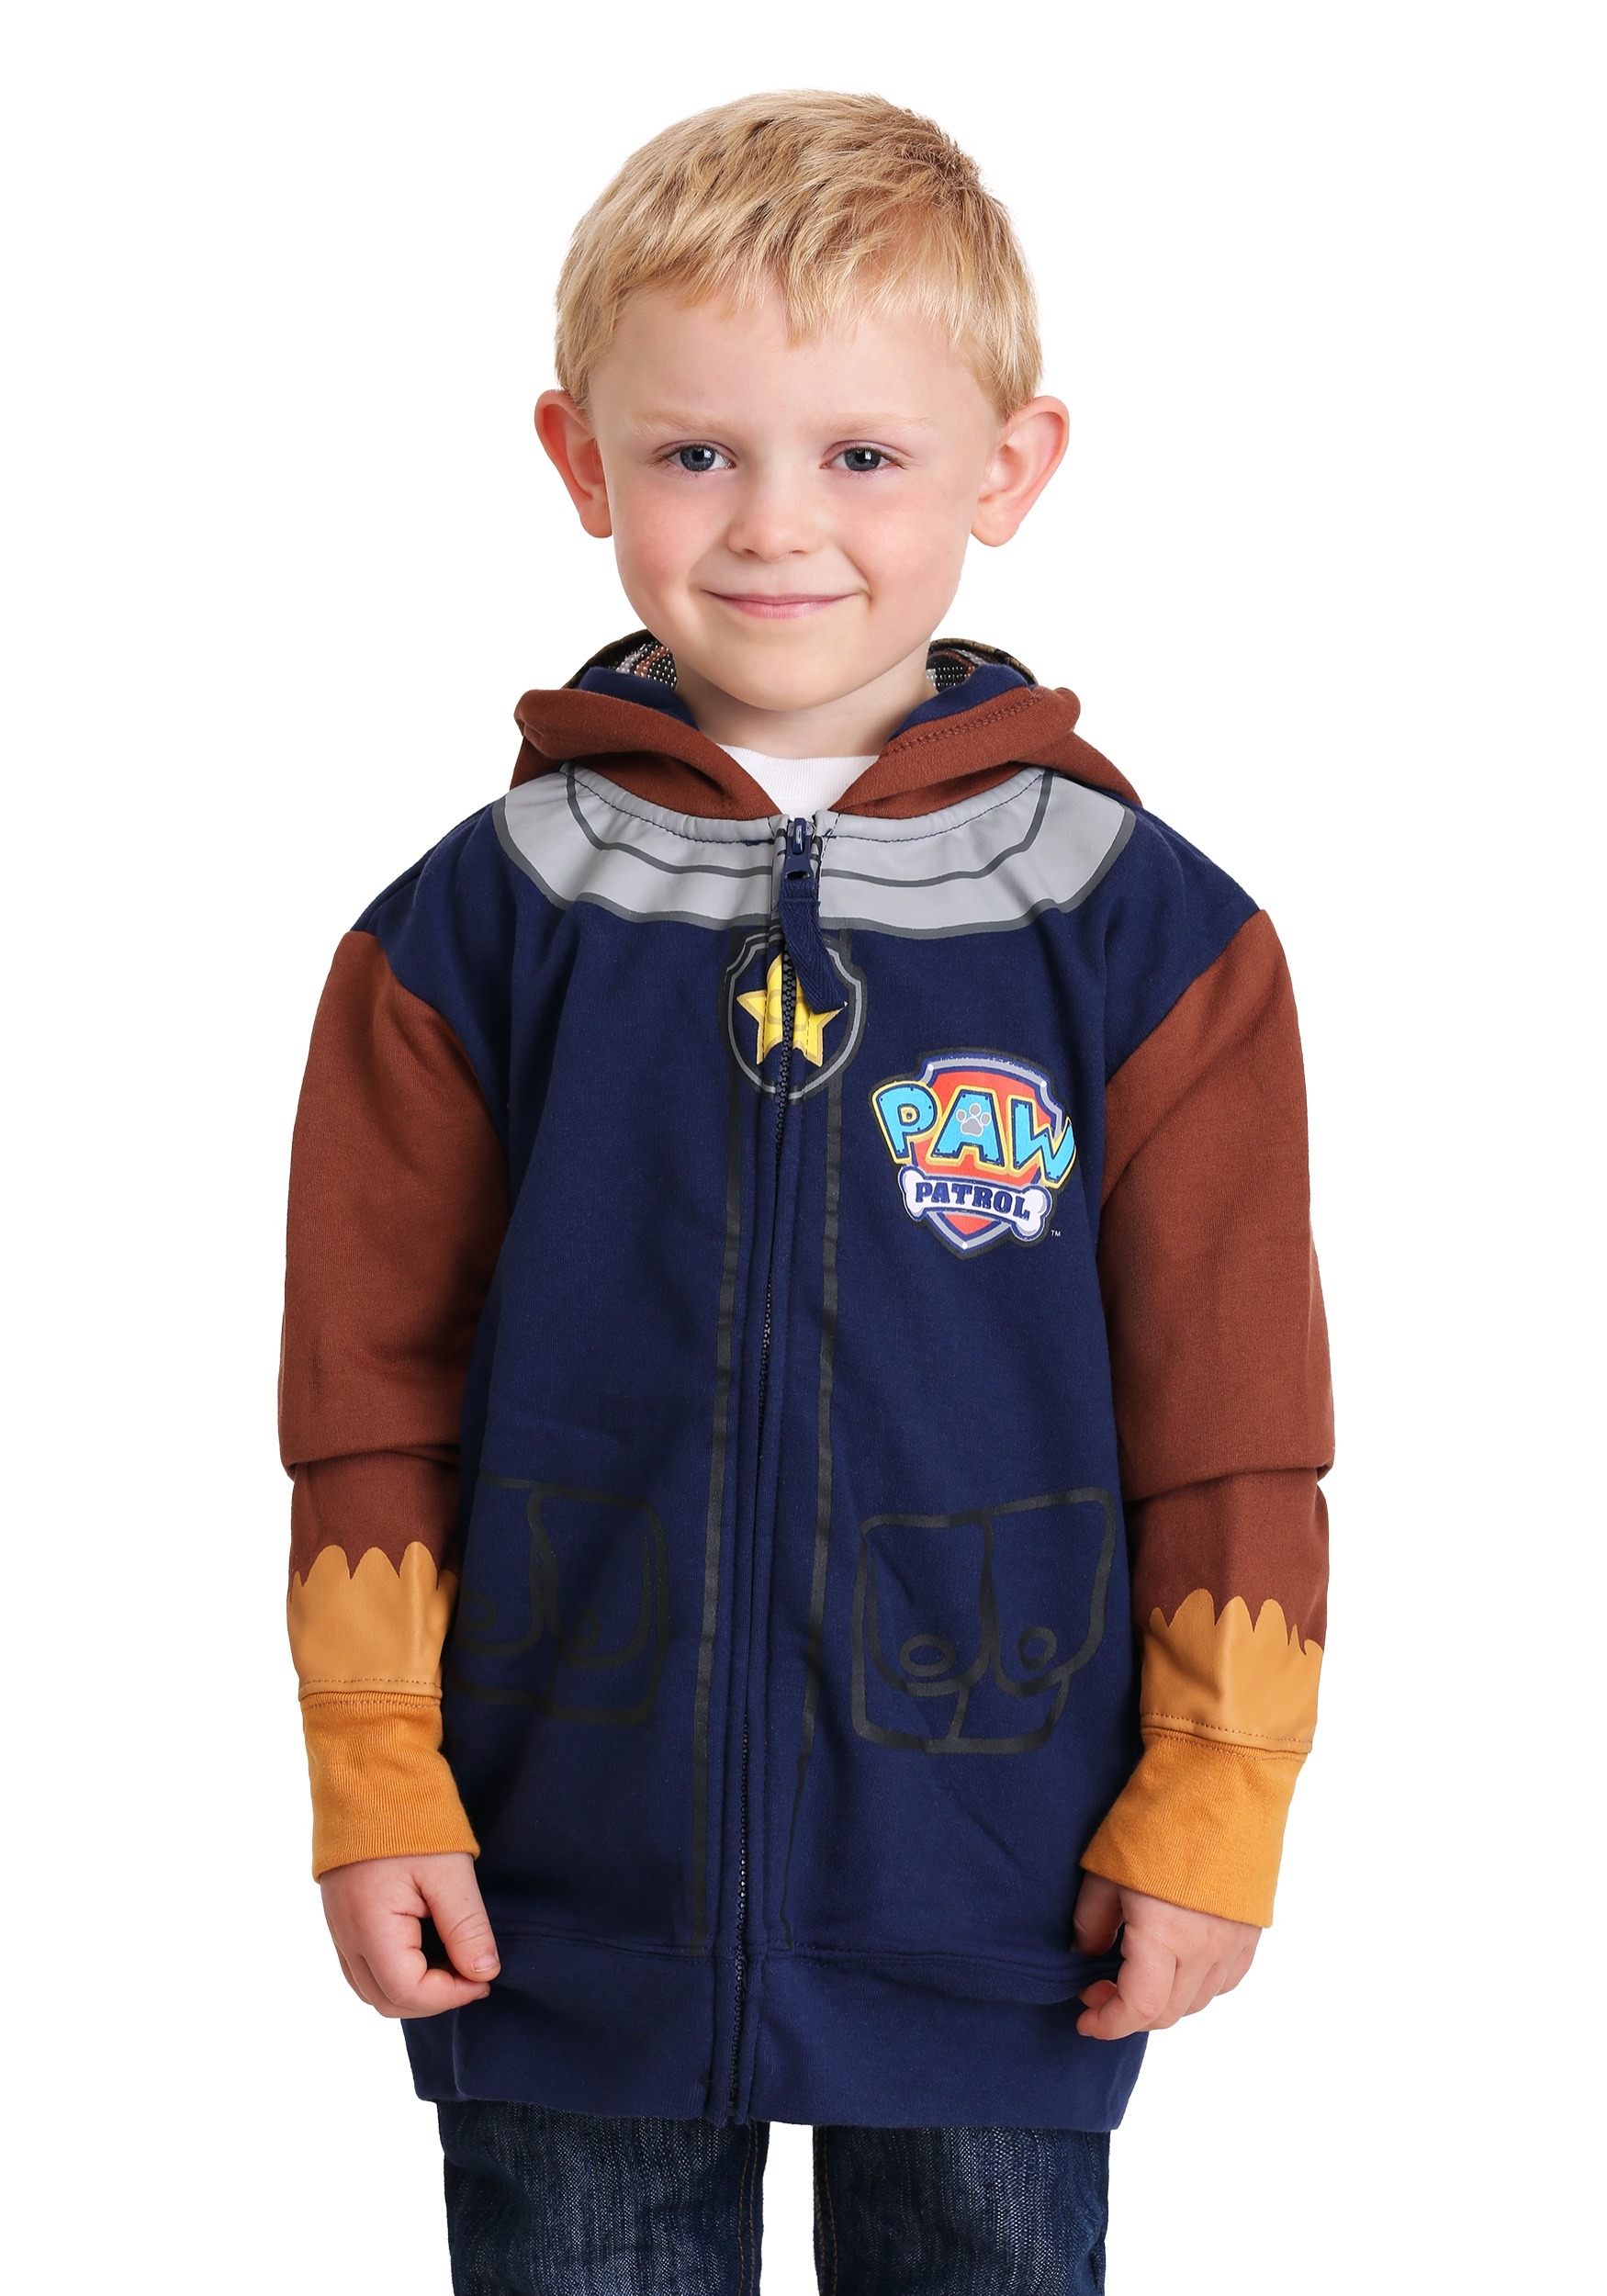 Chase Paw Patrol Costume Hoodie For Boys , TV Show Costumes